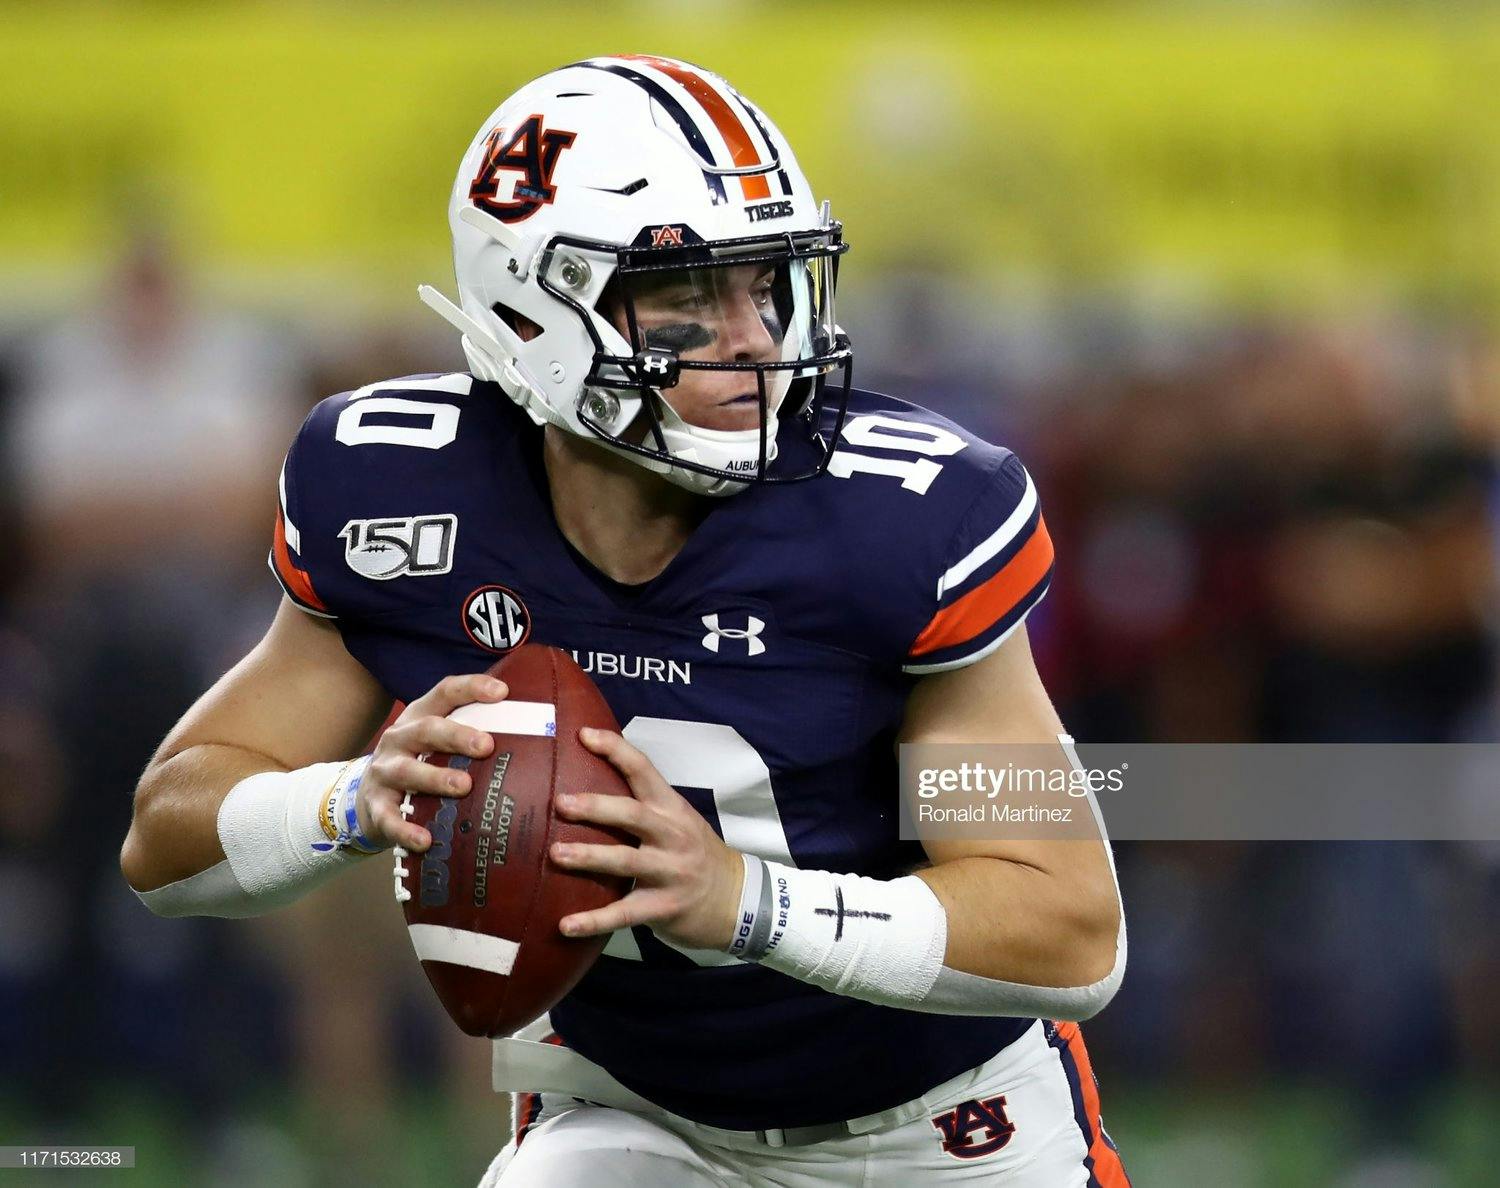 Frasier Horton: If Bo Nix Had Been in the Iron Bowl, Auburn Would Have Won